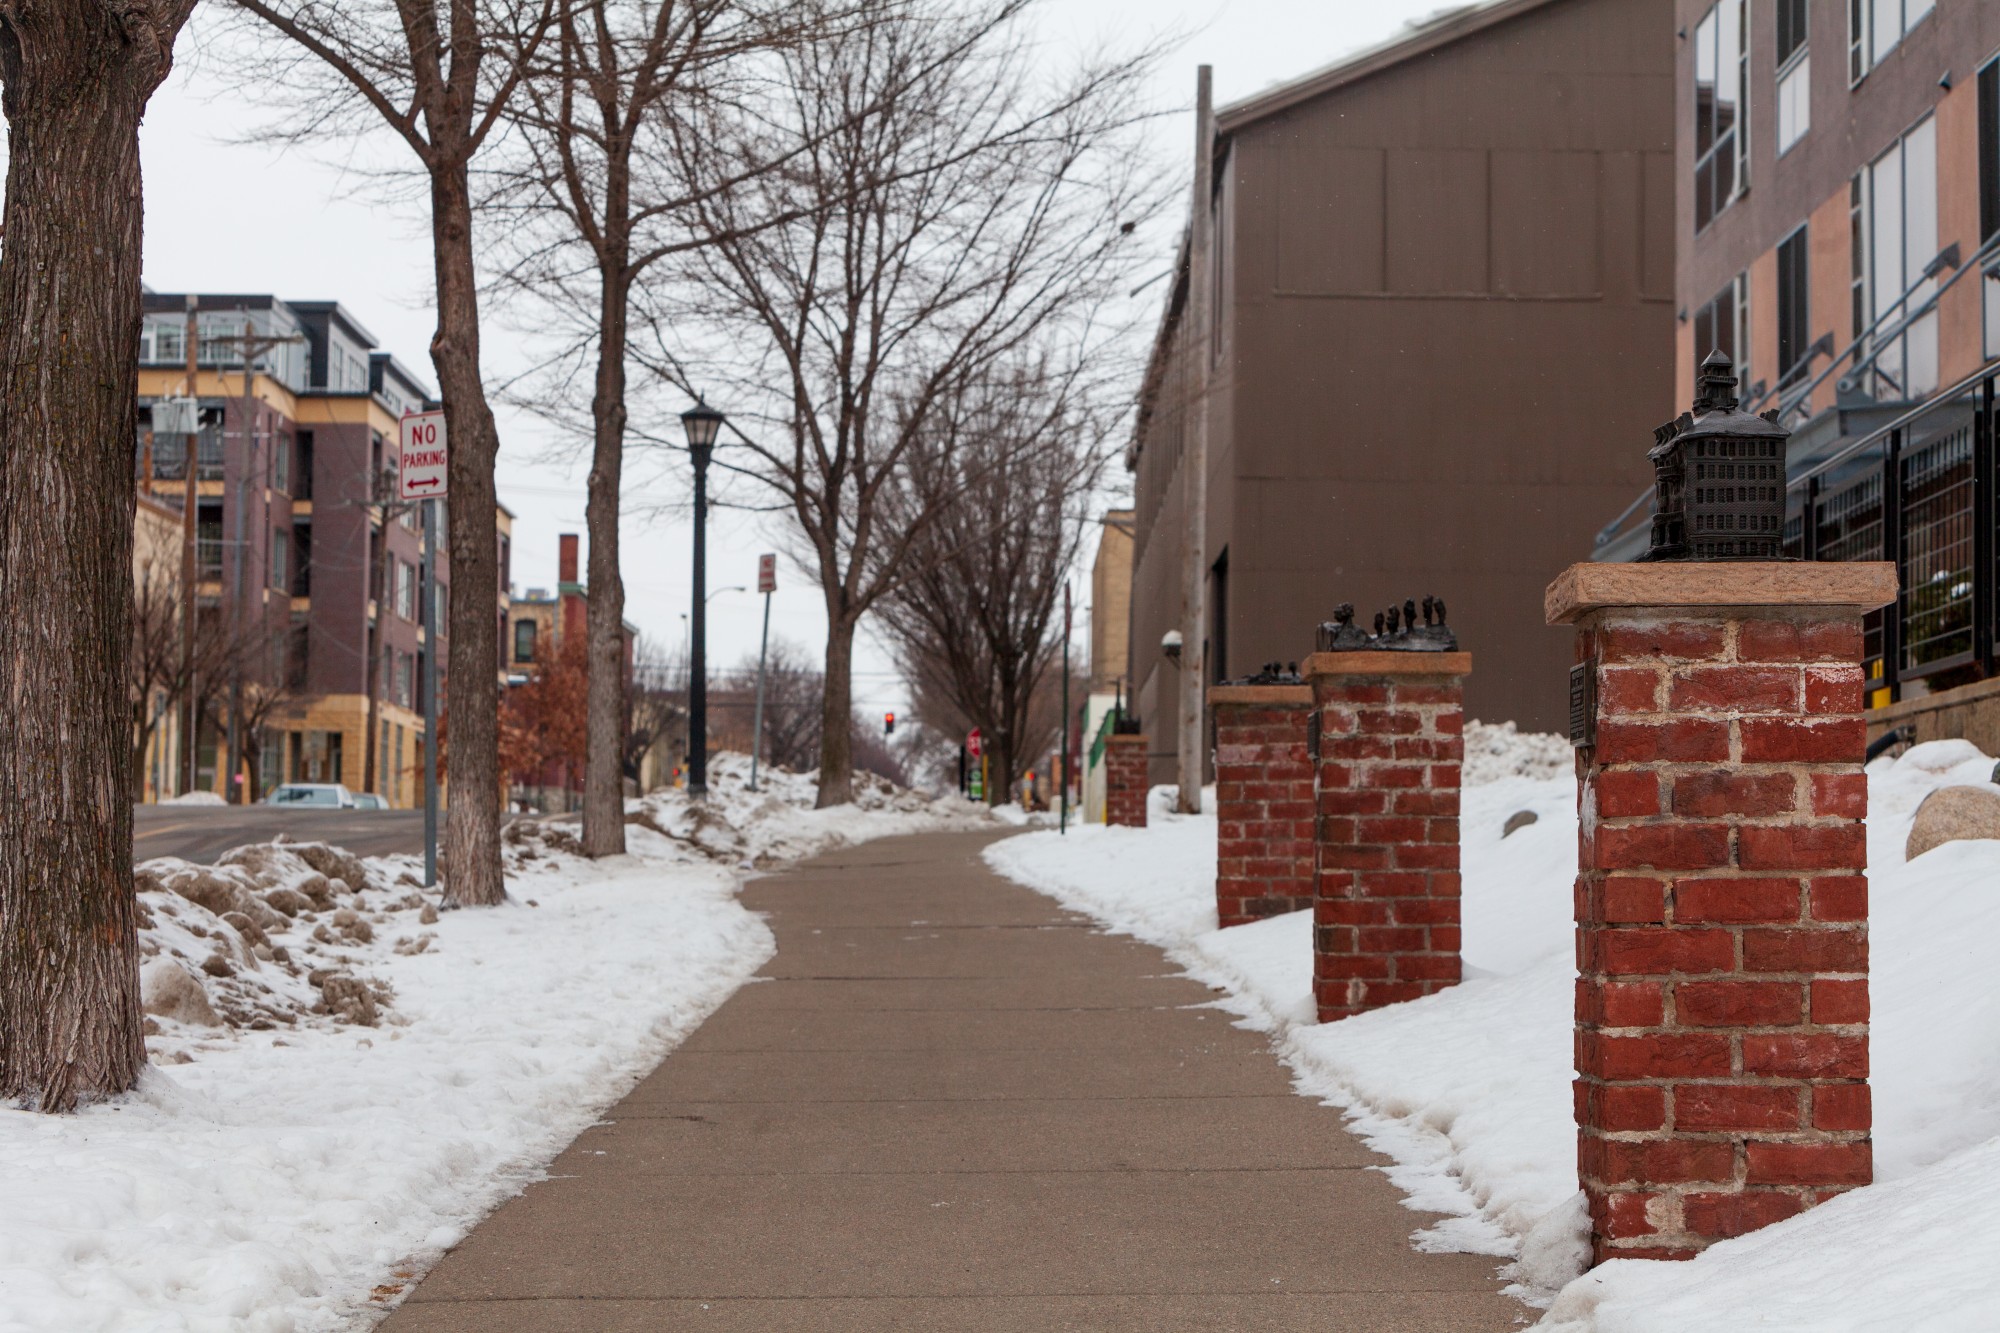 Miniature  bronze replicas of local landmarks line the sidewalk at the Neighborhood Gateway in the Marcy Holmes neighborhood on Tuesday, Jan. 28.  The neighborhood provides housing for a significant number of University students.